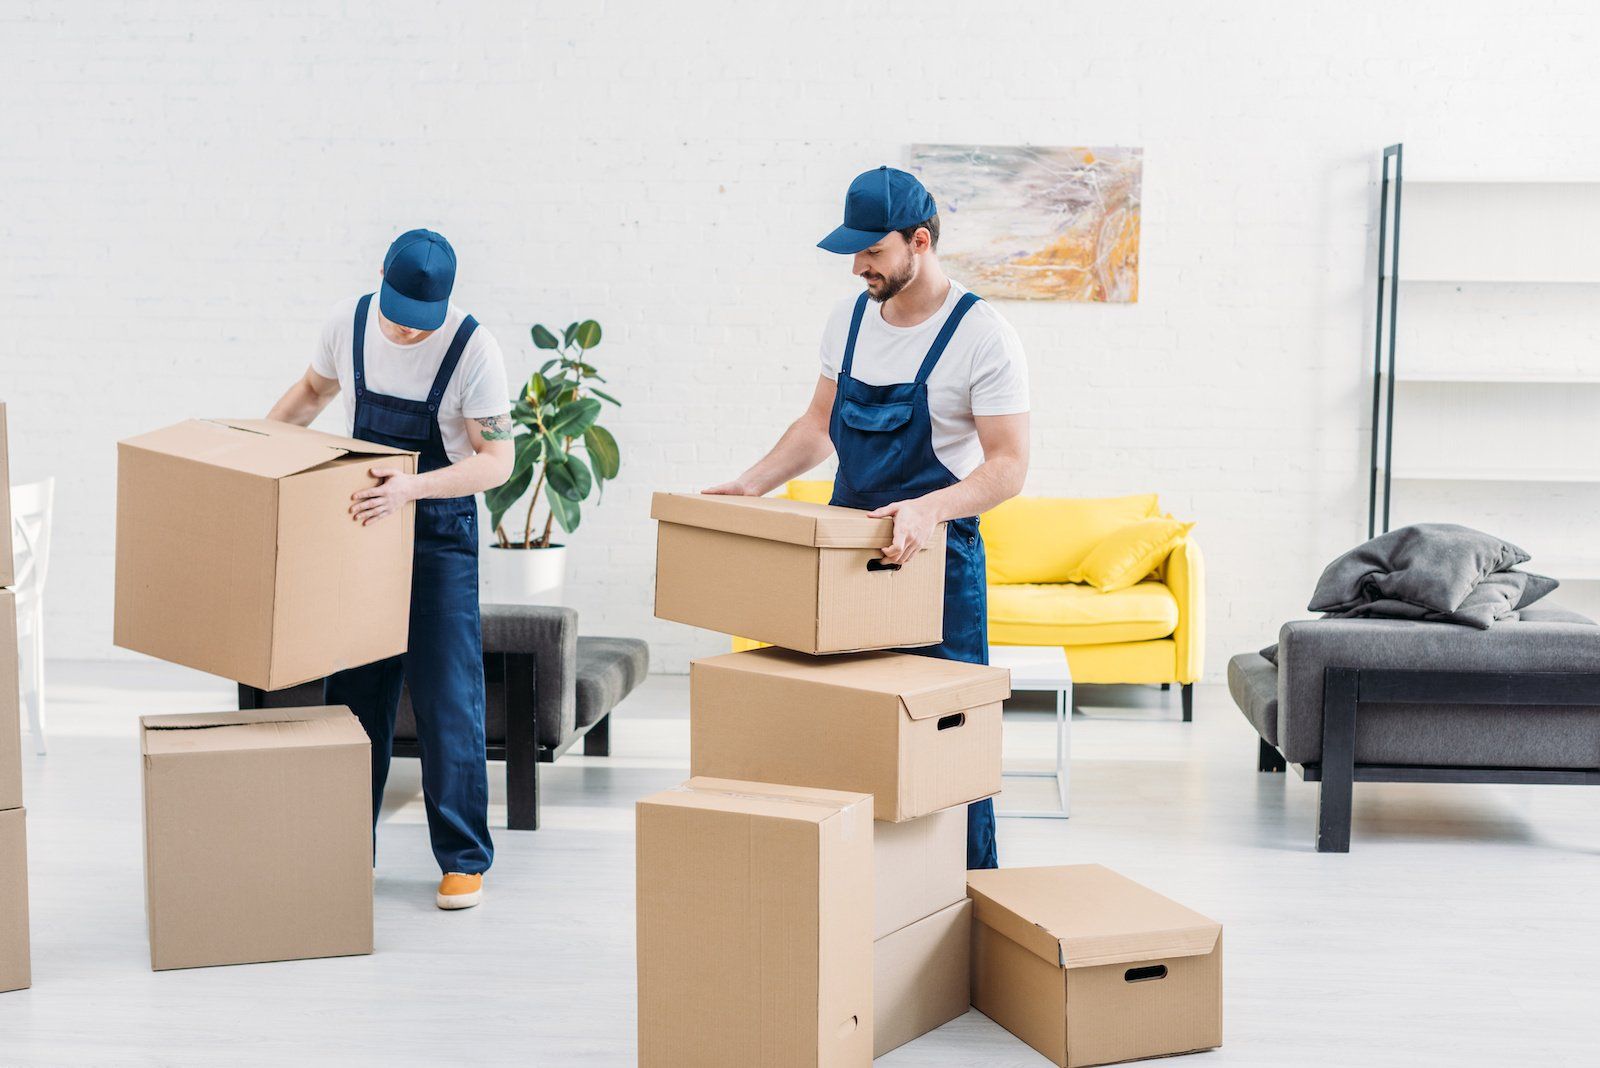 Professional movers in matching uniforms carefully transport cardboard boxes filled with belongings within a contemporary apartment.